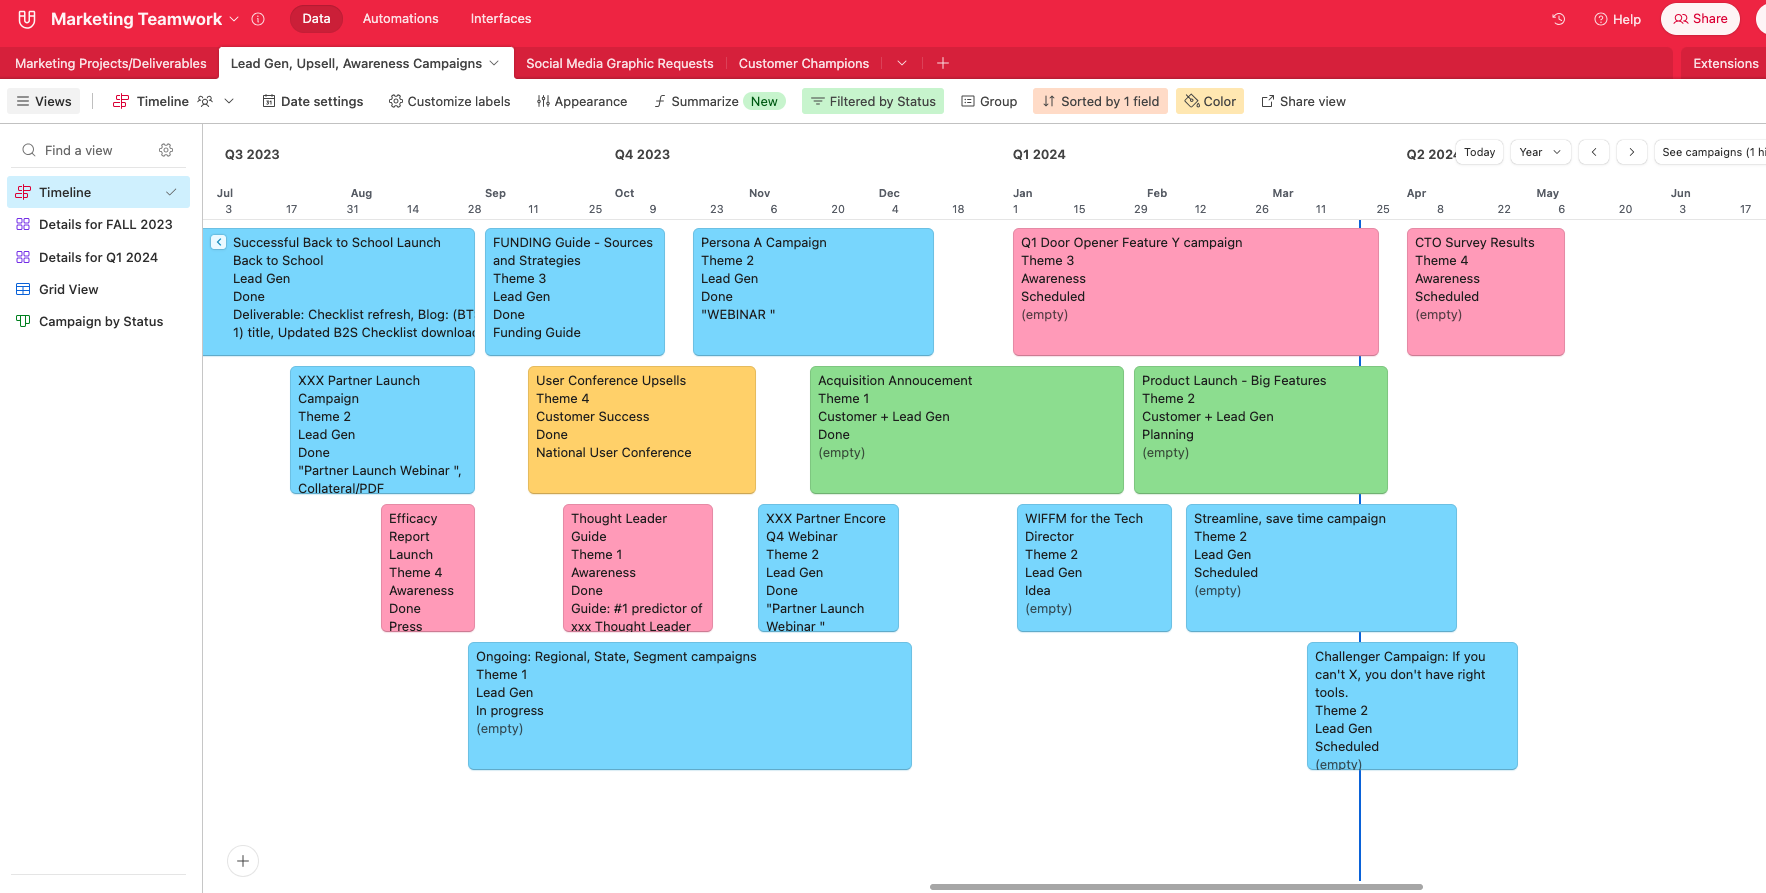 Image of an airtable timeline view of about 15 marketing campaigns over 6 months.